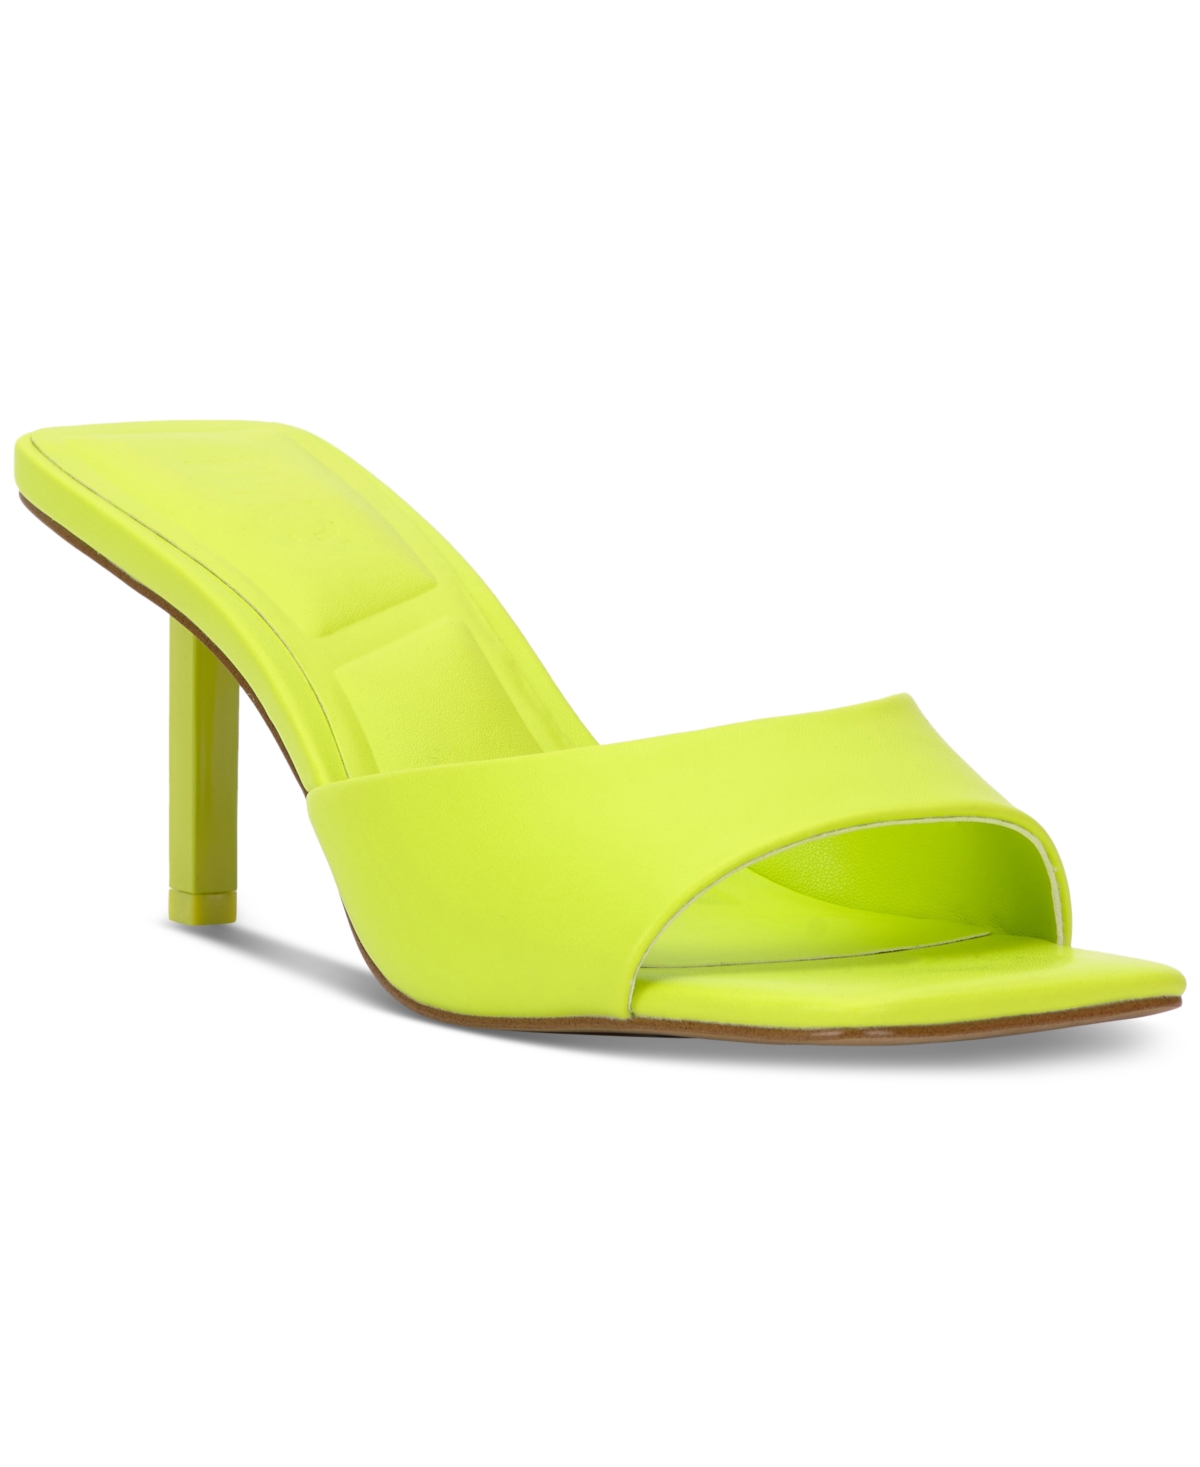 Dalea Slide Dress Sandals, Created for Macy's - Citron Smooth